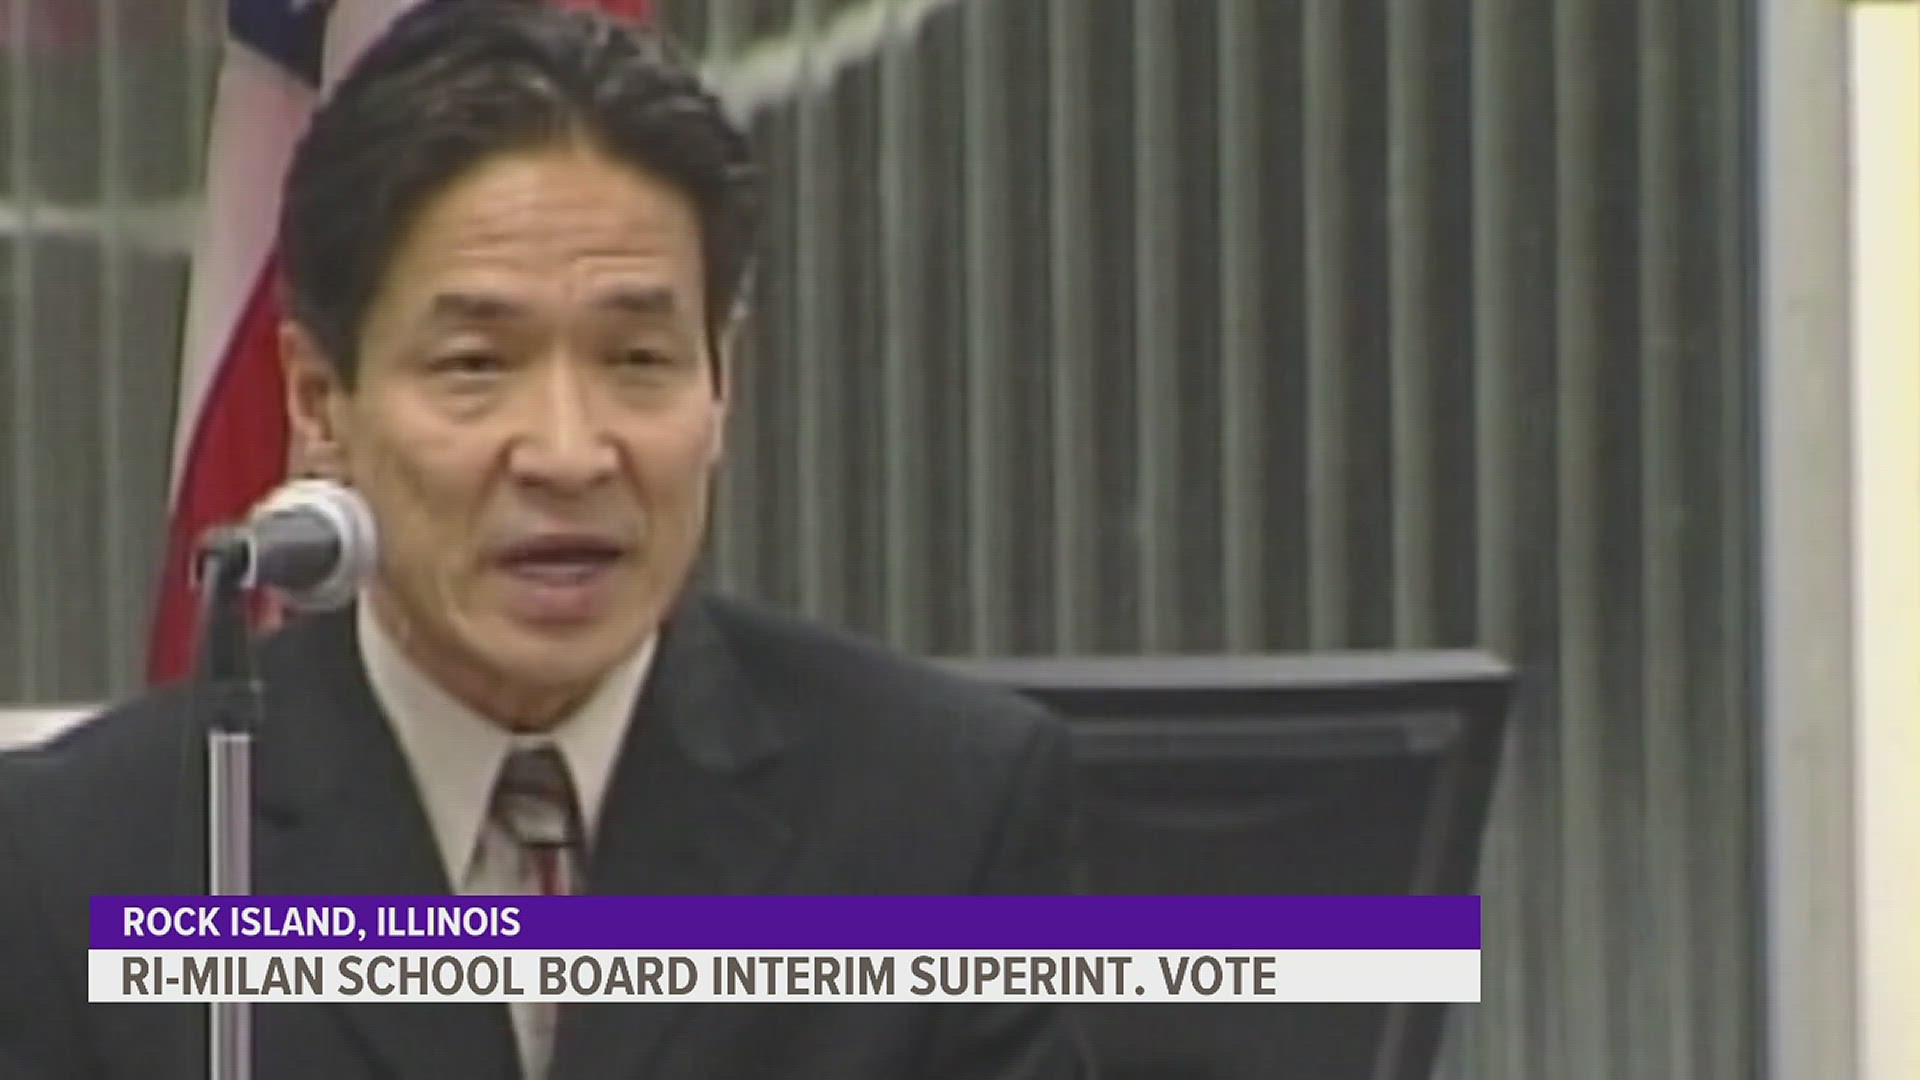 The board is looking to hire Cal Lee, the former Moline superintendent, for a rate of $650 per day.